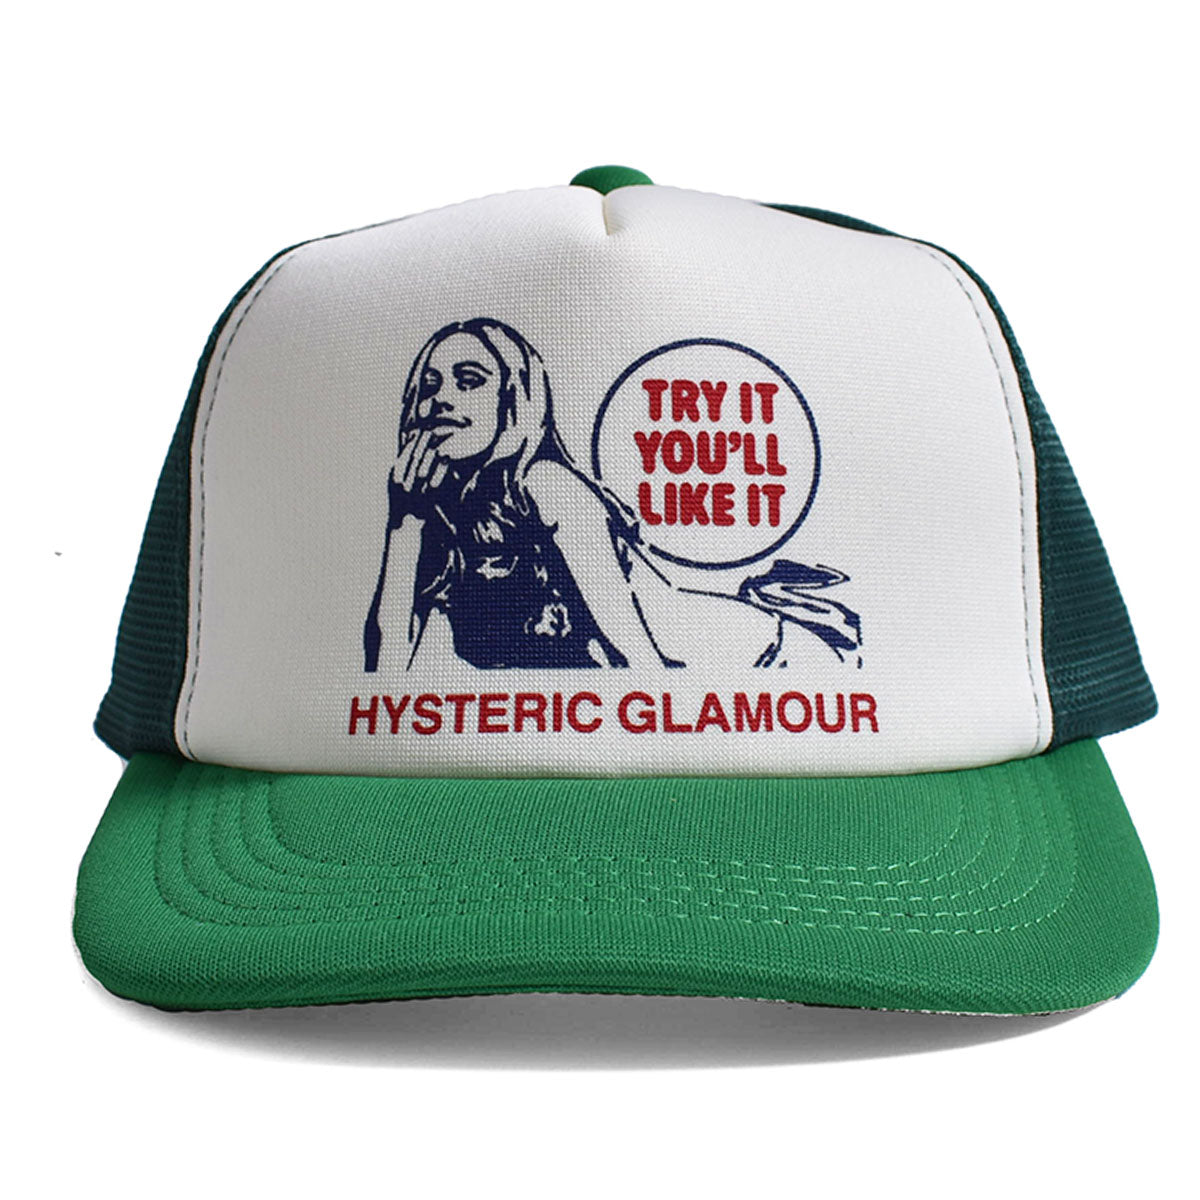 HYSTERIC GLAMOUR]TRY IT YOU'LL LIKE IT メッシュキャップ